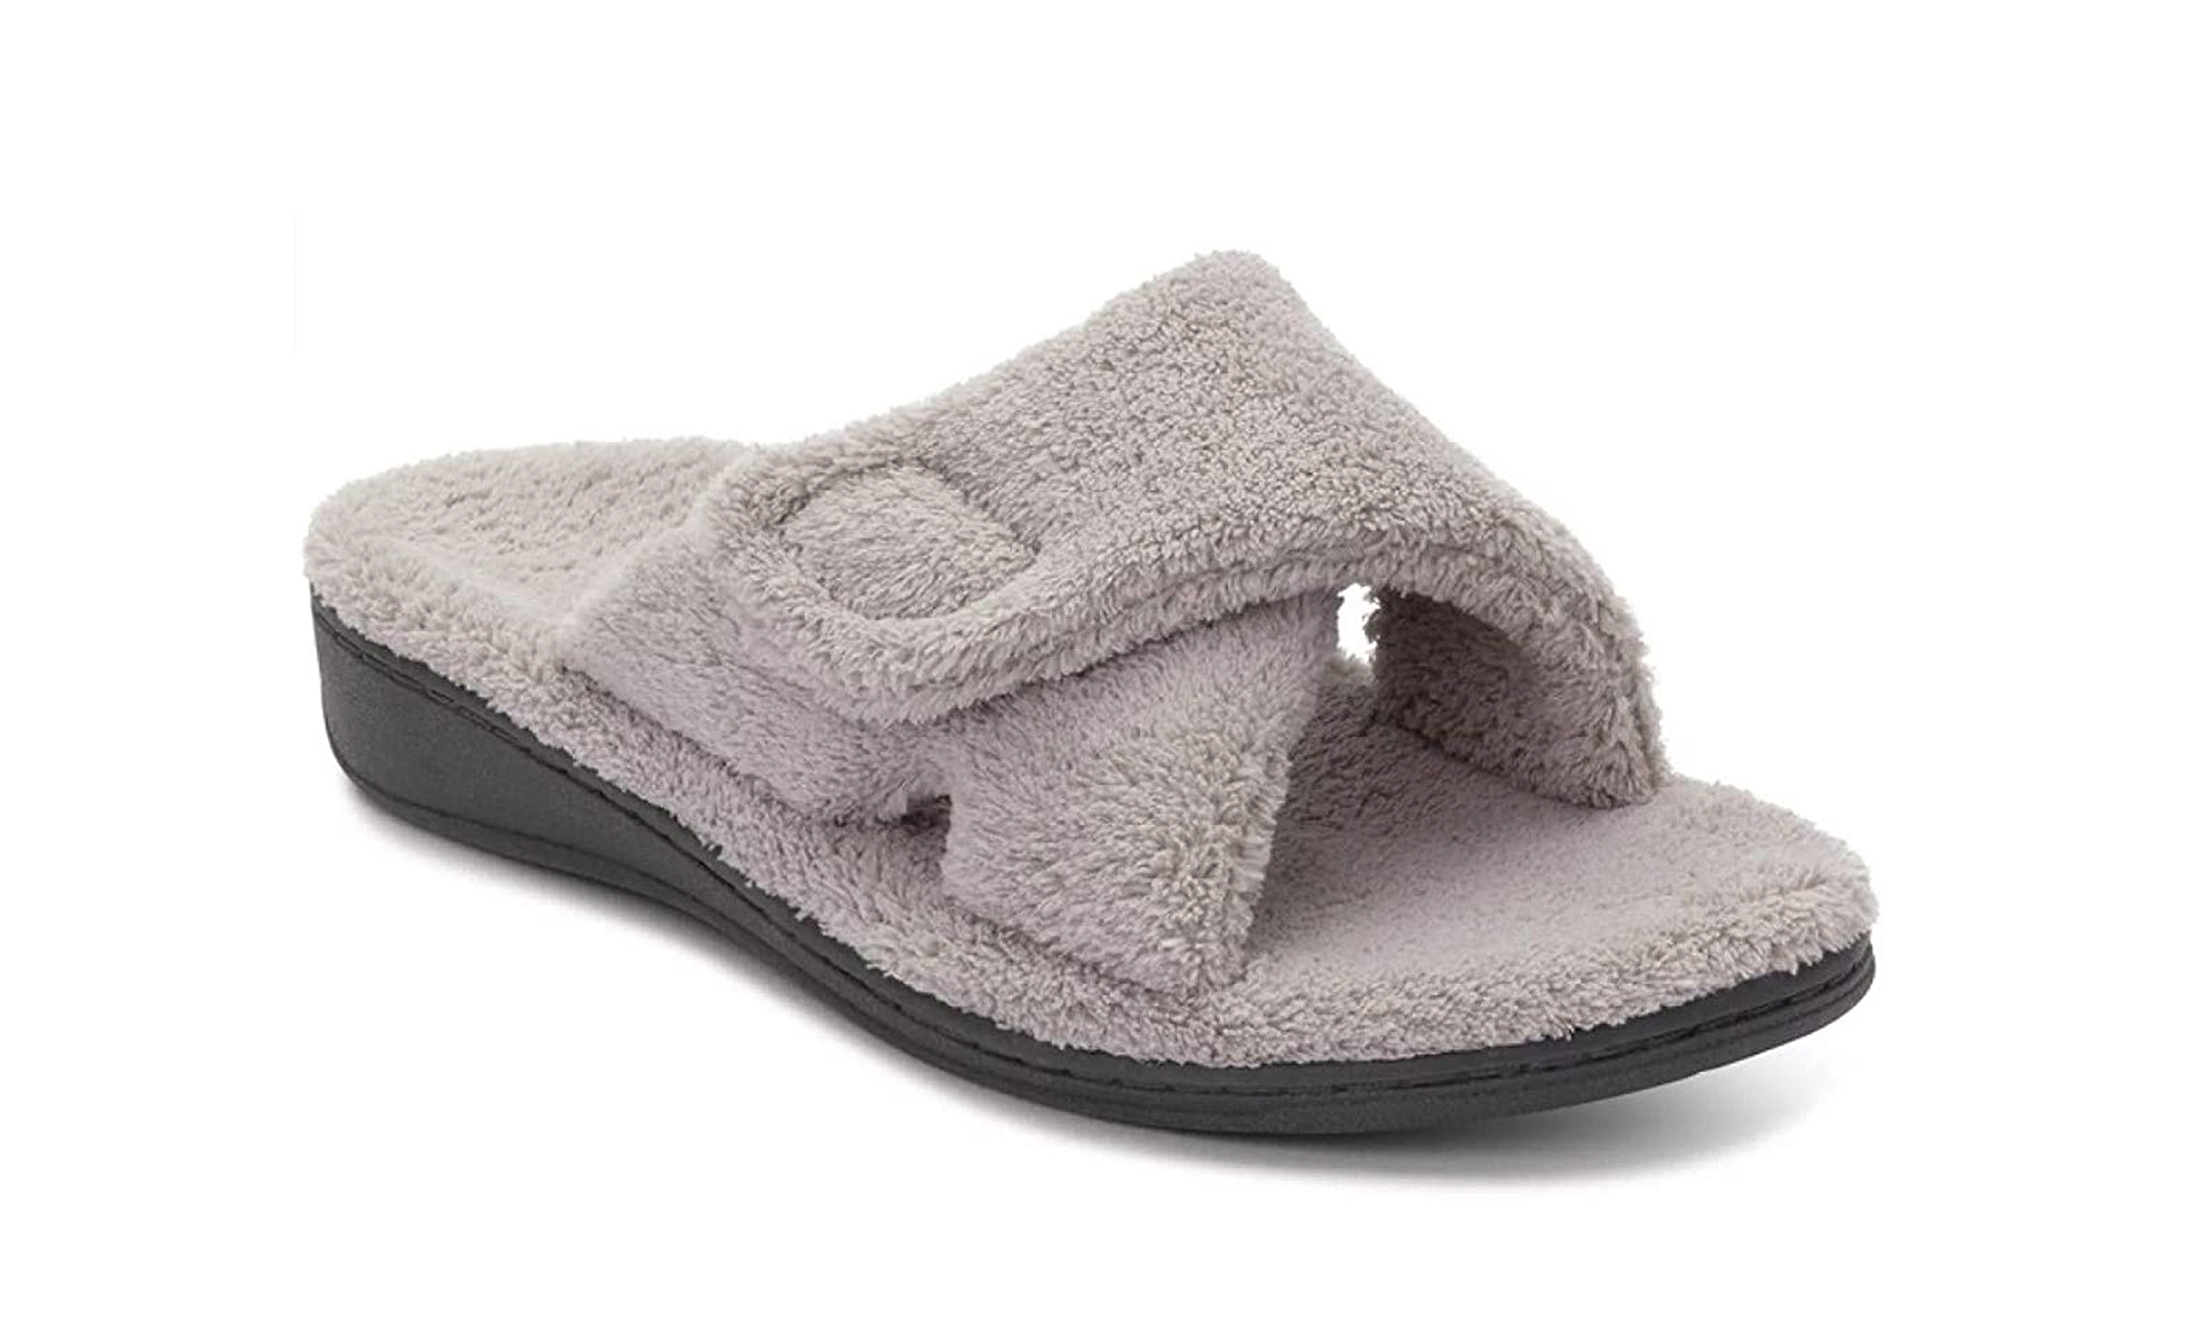 Vionic On-Sale Slippers May Be the Best 